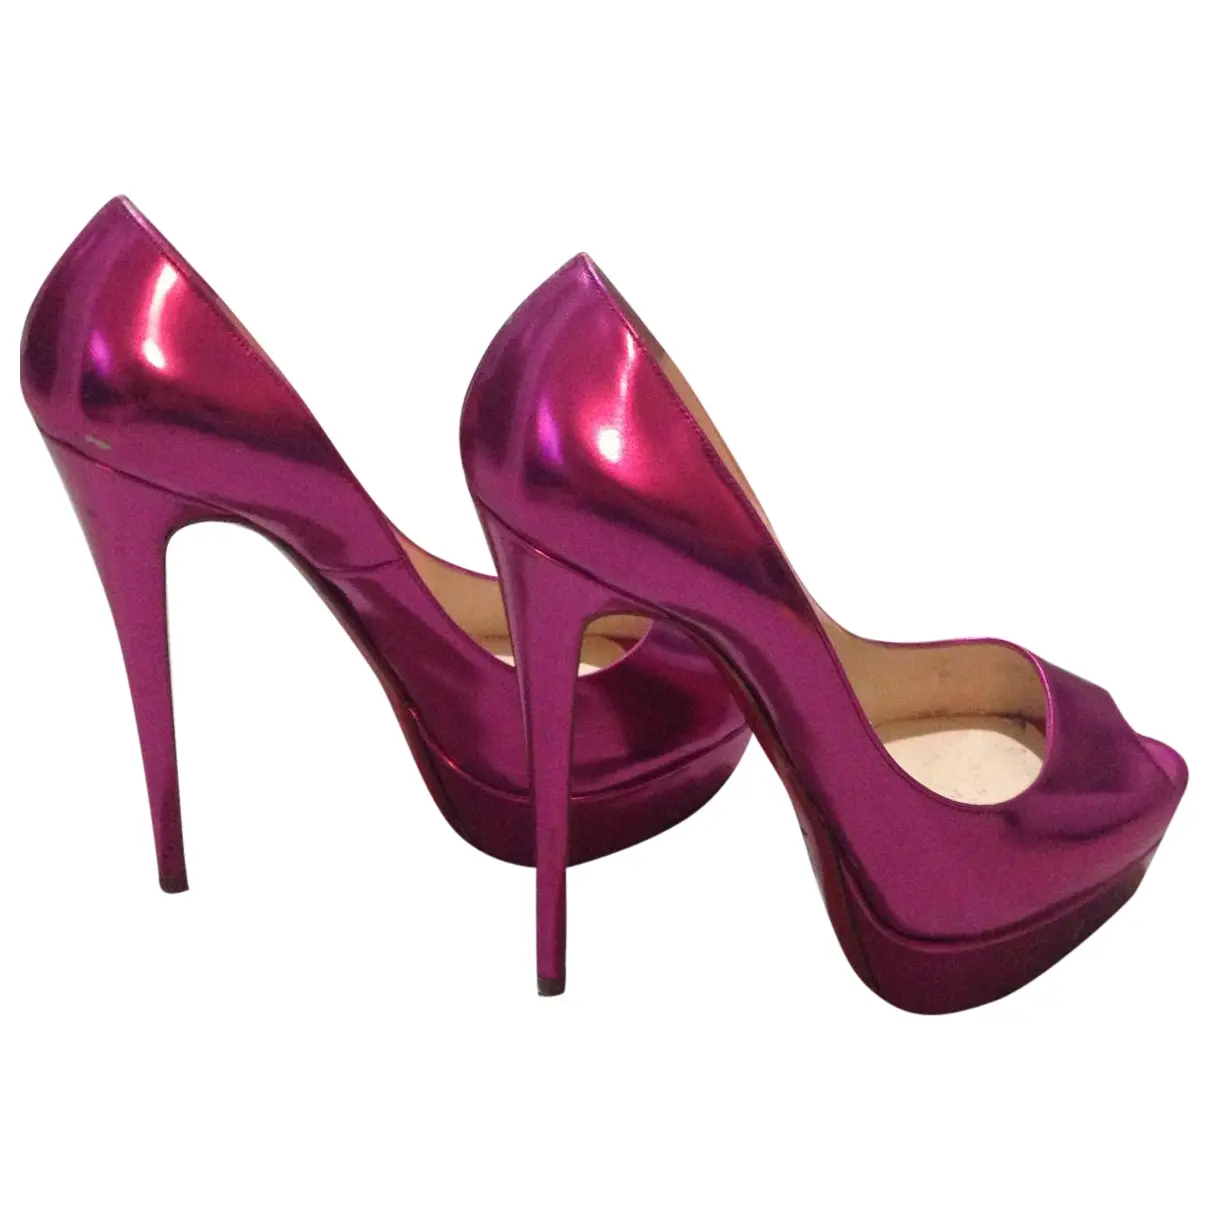 Pink Patent leather Heels Christian Louboutin